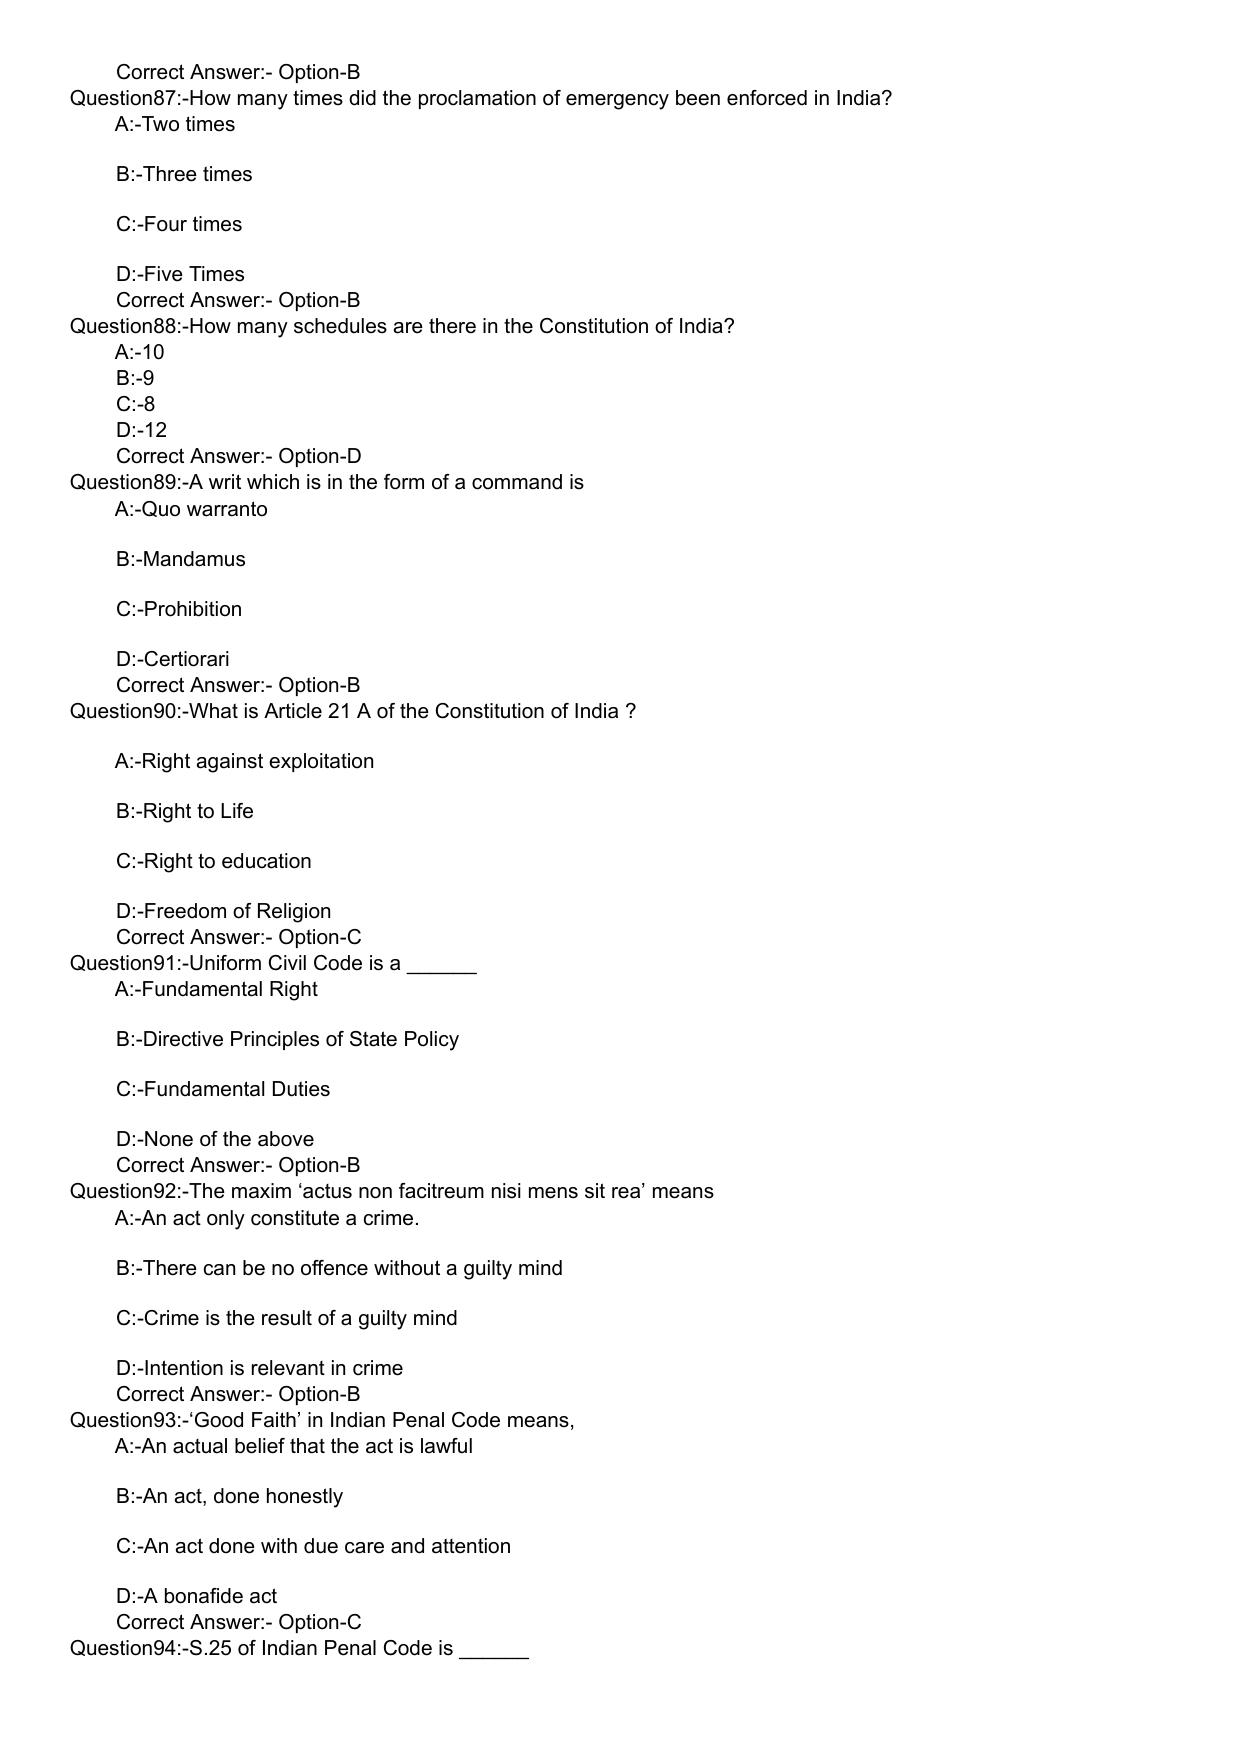 KLEE 5 Year LLB Exam 2020 Question Paper - Page 17